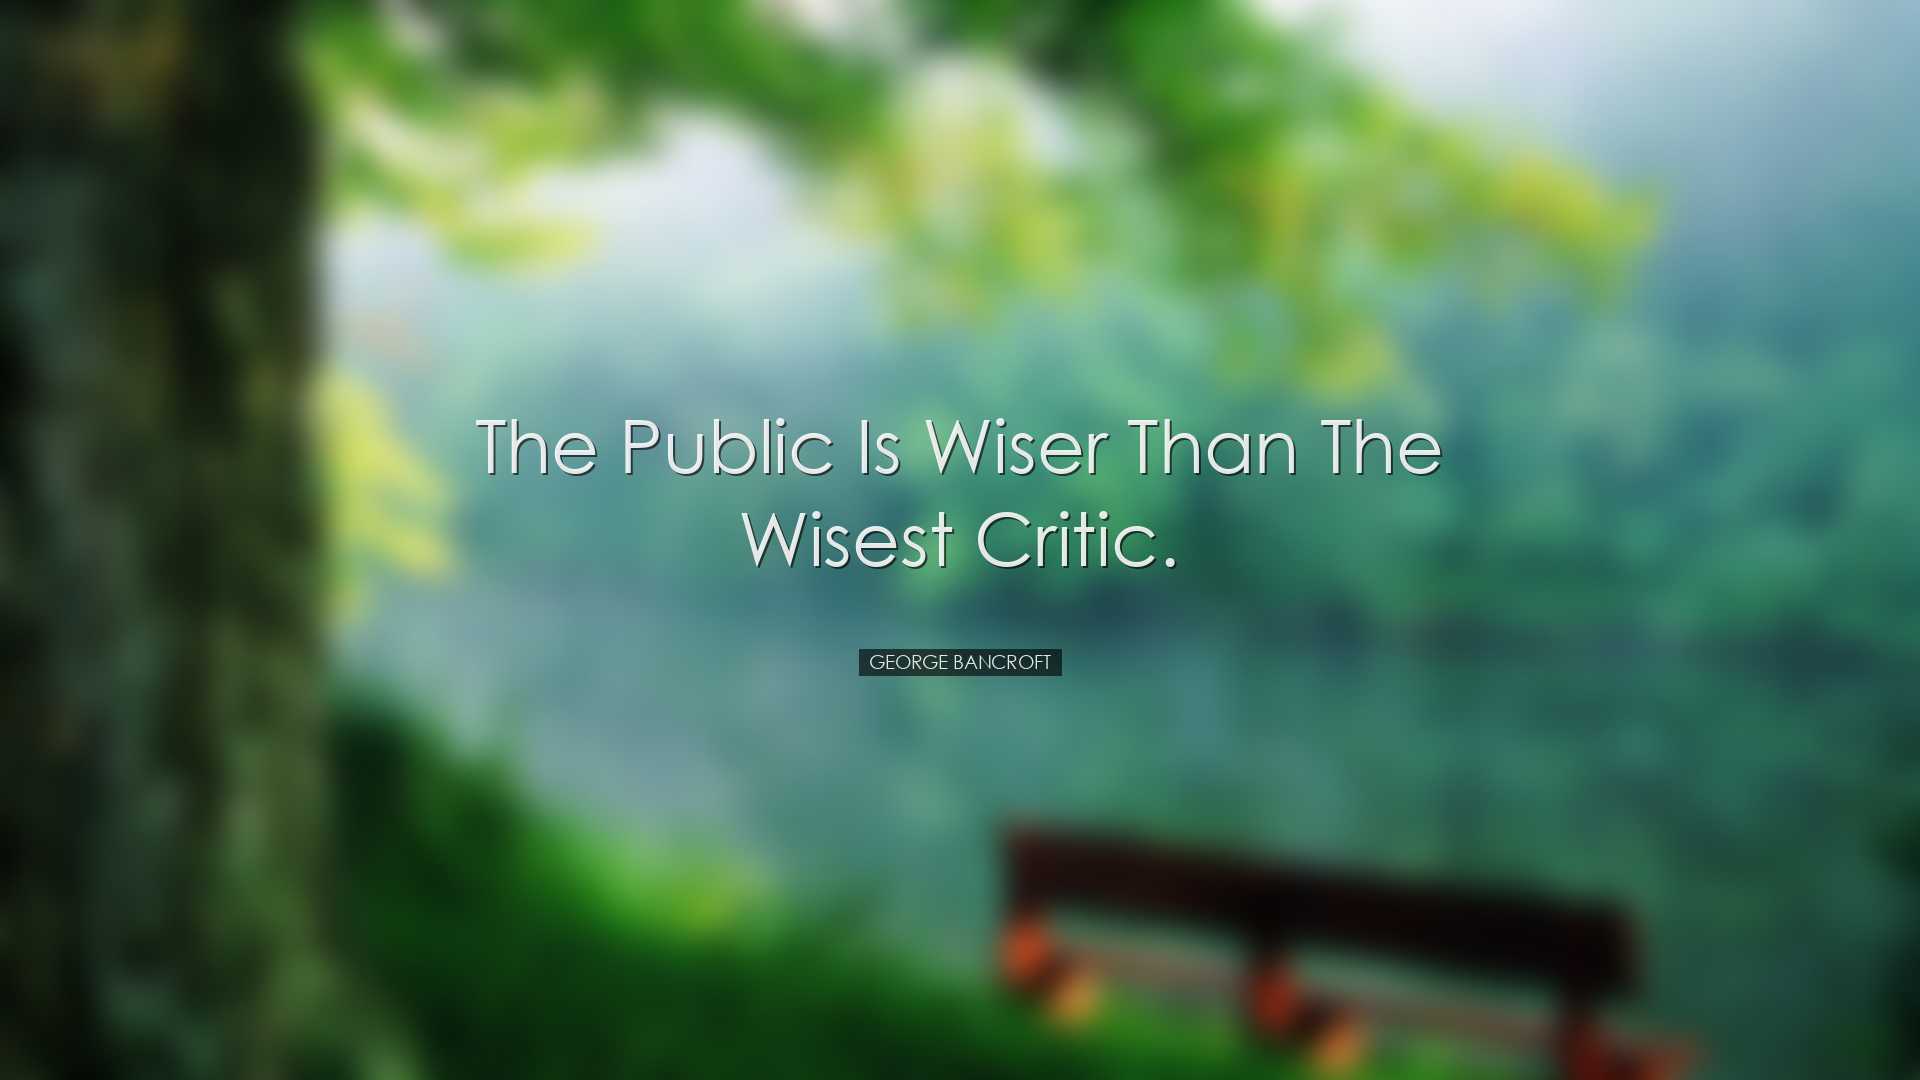 The public is wiser than the wisest critic. - George Bancroft